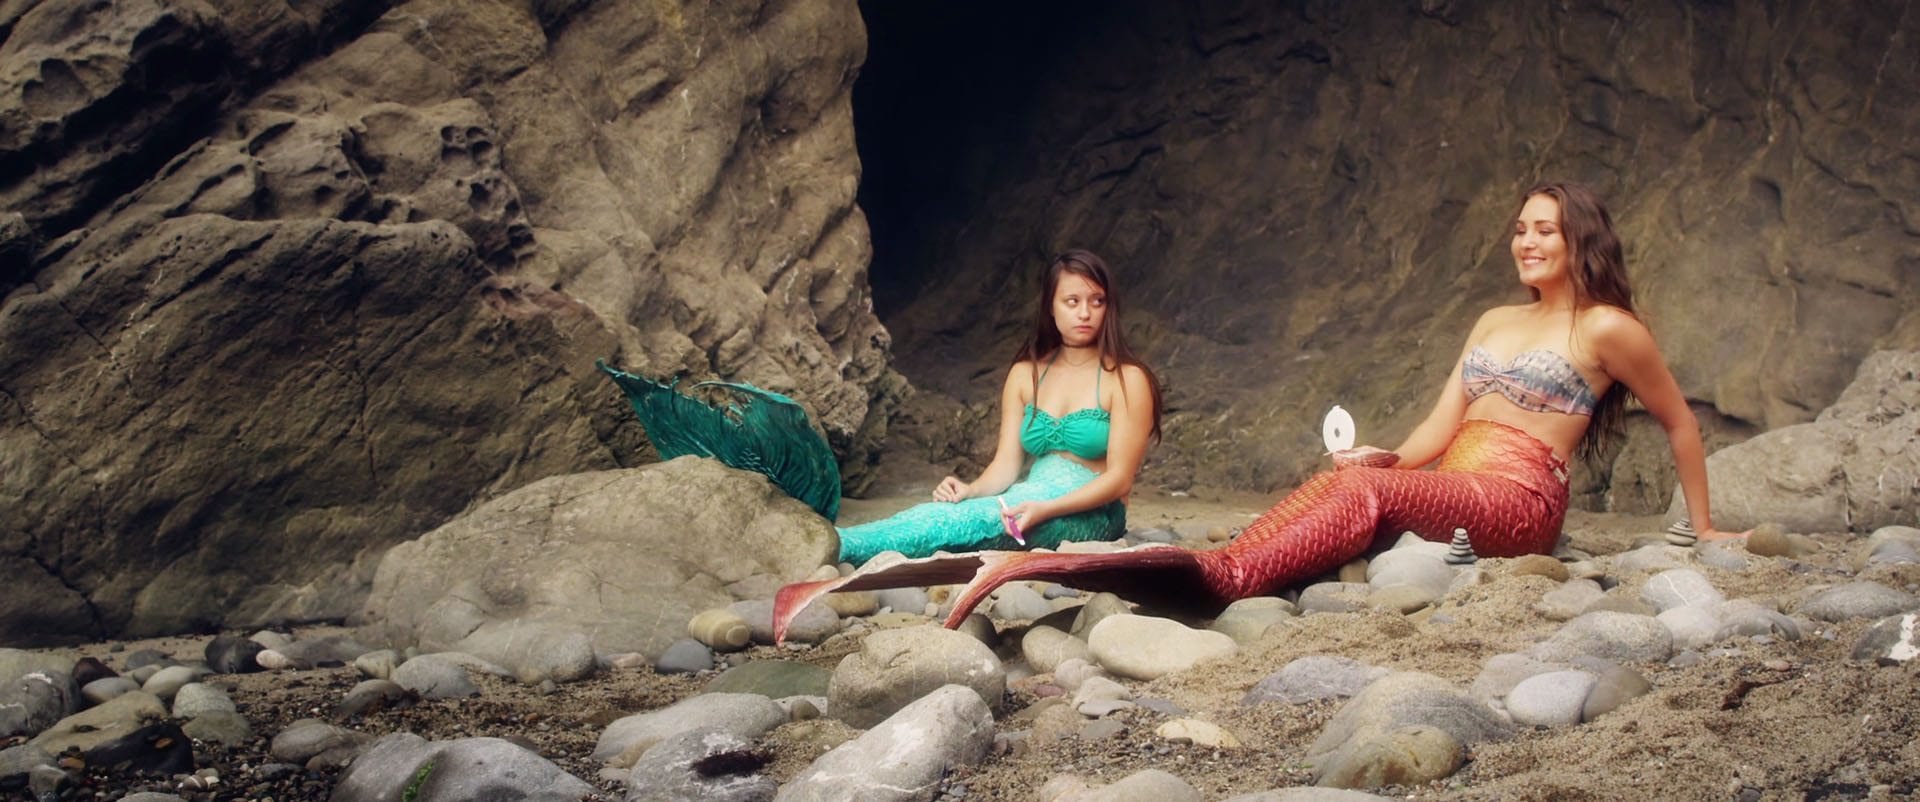 'Life as a Mermaid' is the widely popular family fantasy series about two ambitious mermaid sisters who set out to prove merpeople & humans can coexist.